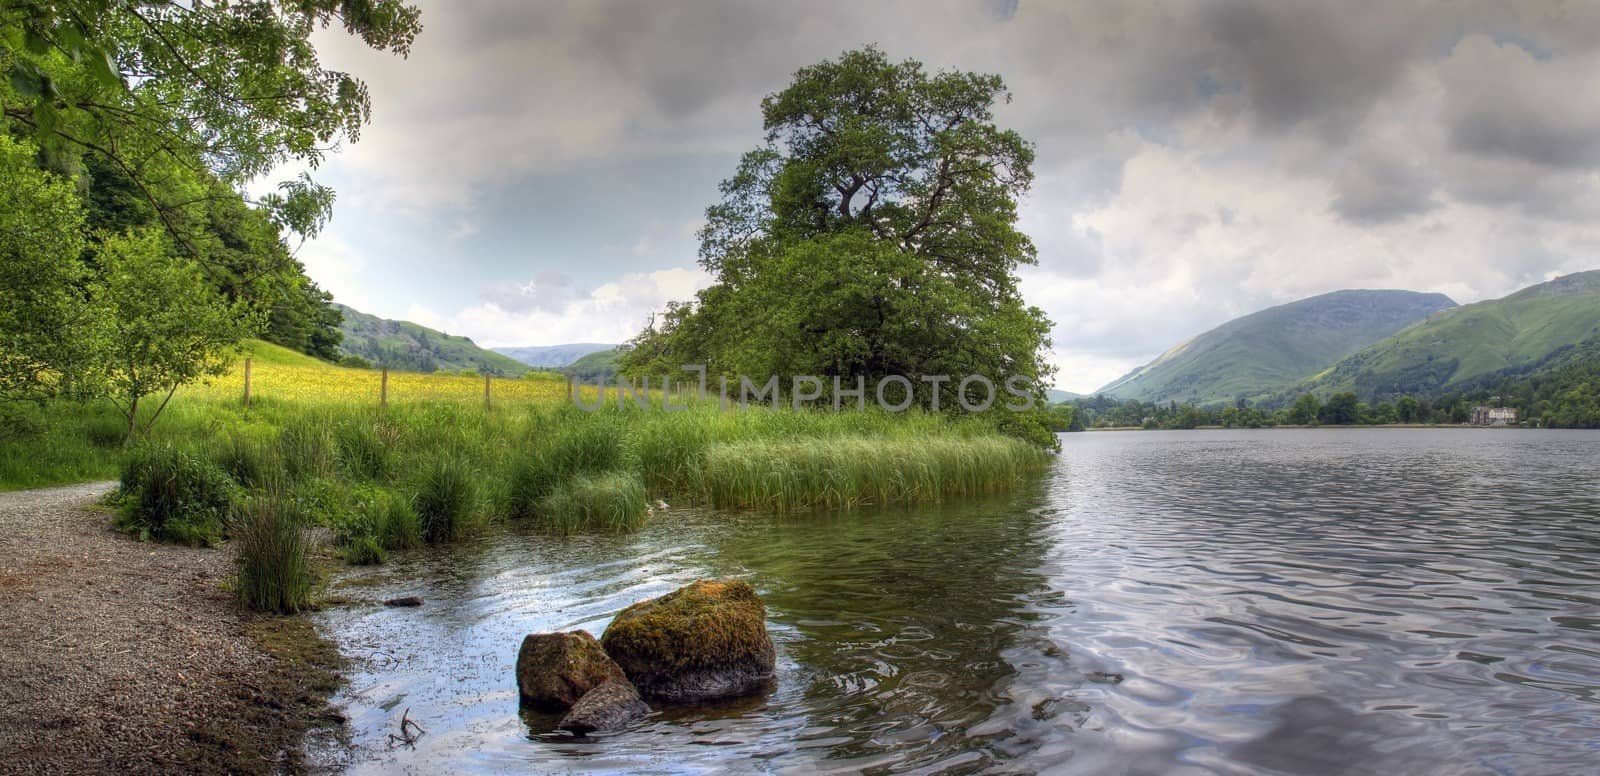 Buttercup meadow on the shores of Grasmere, the Lake District, Cumbria, England.